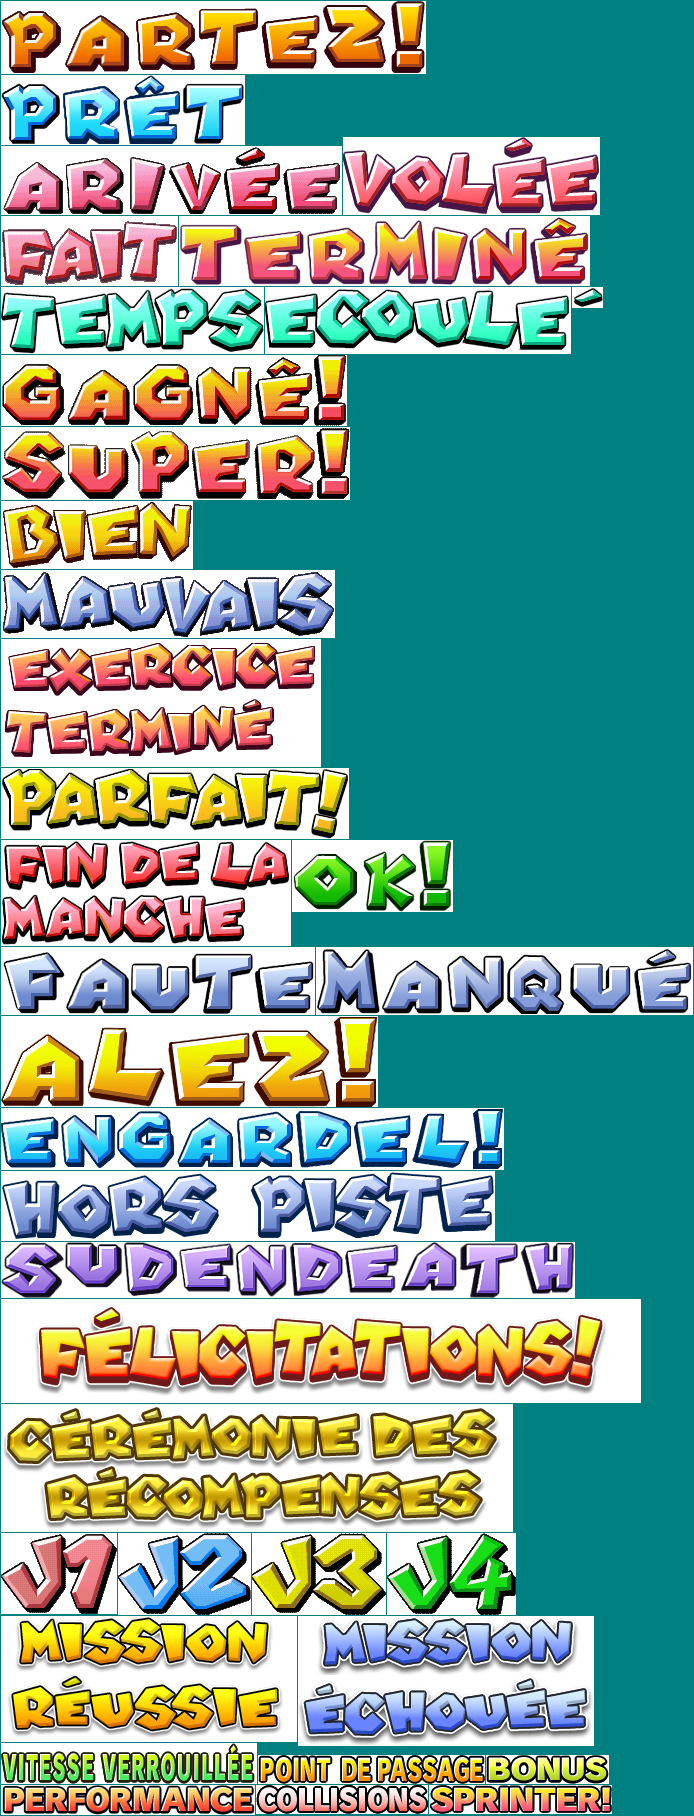 Text (French)